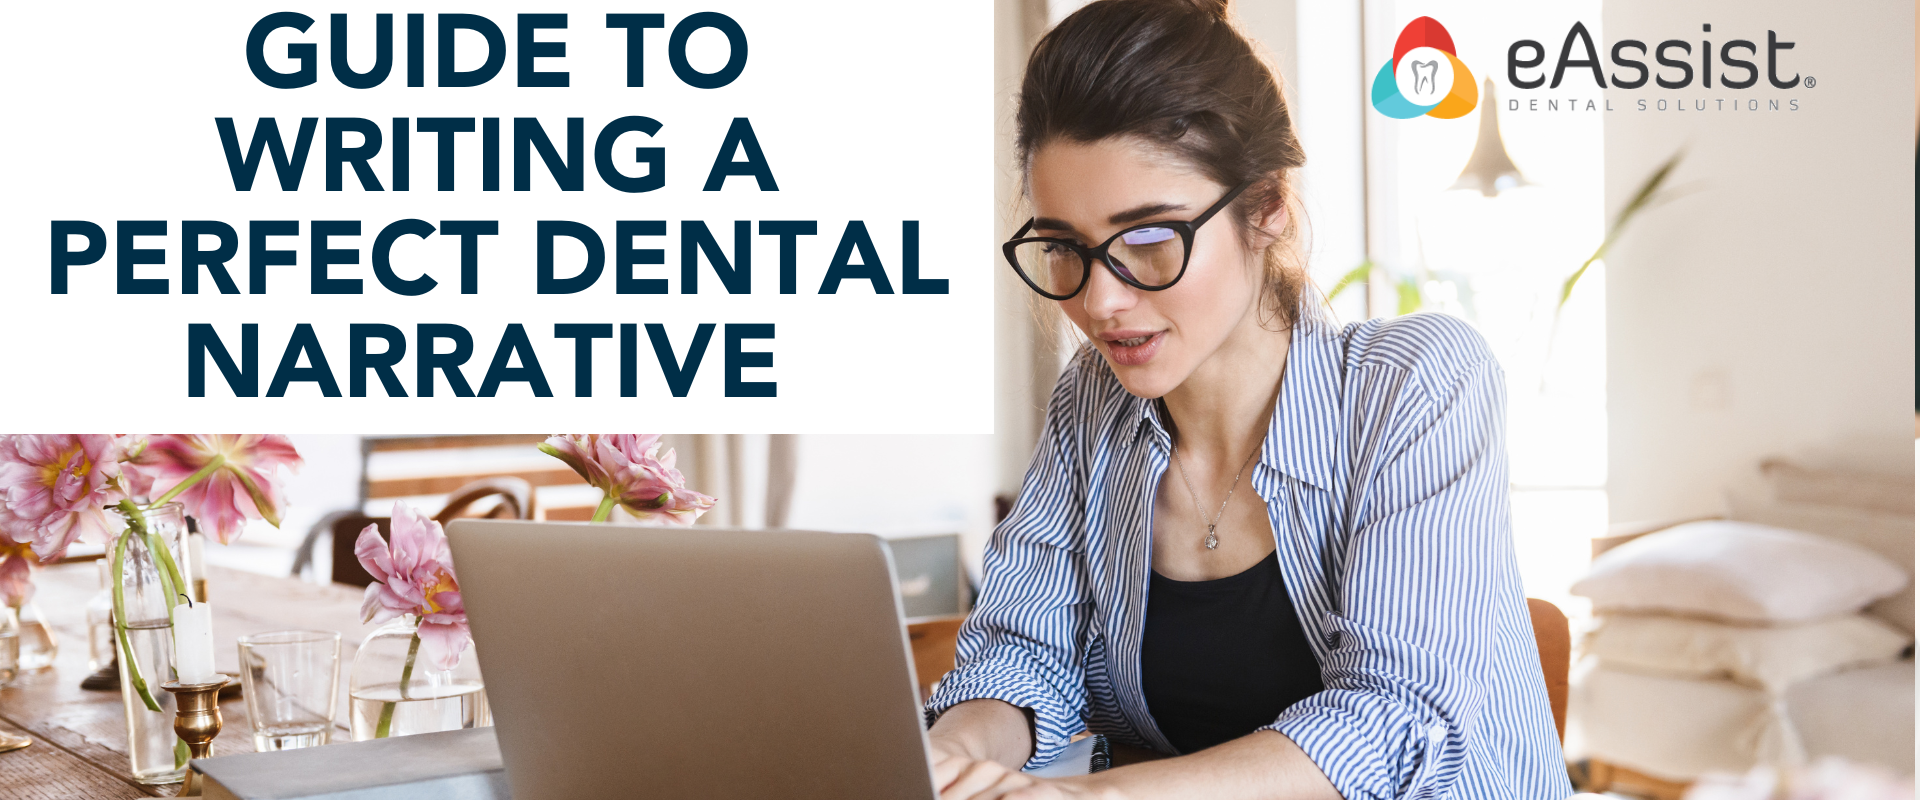 Guide to Writing a Perfect Dental Narrative eAssist Dental Billing